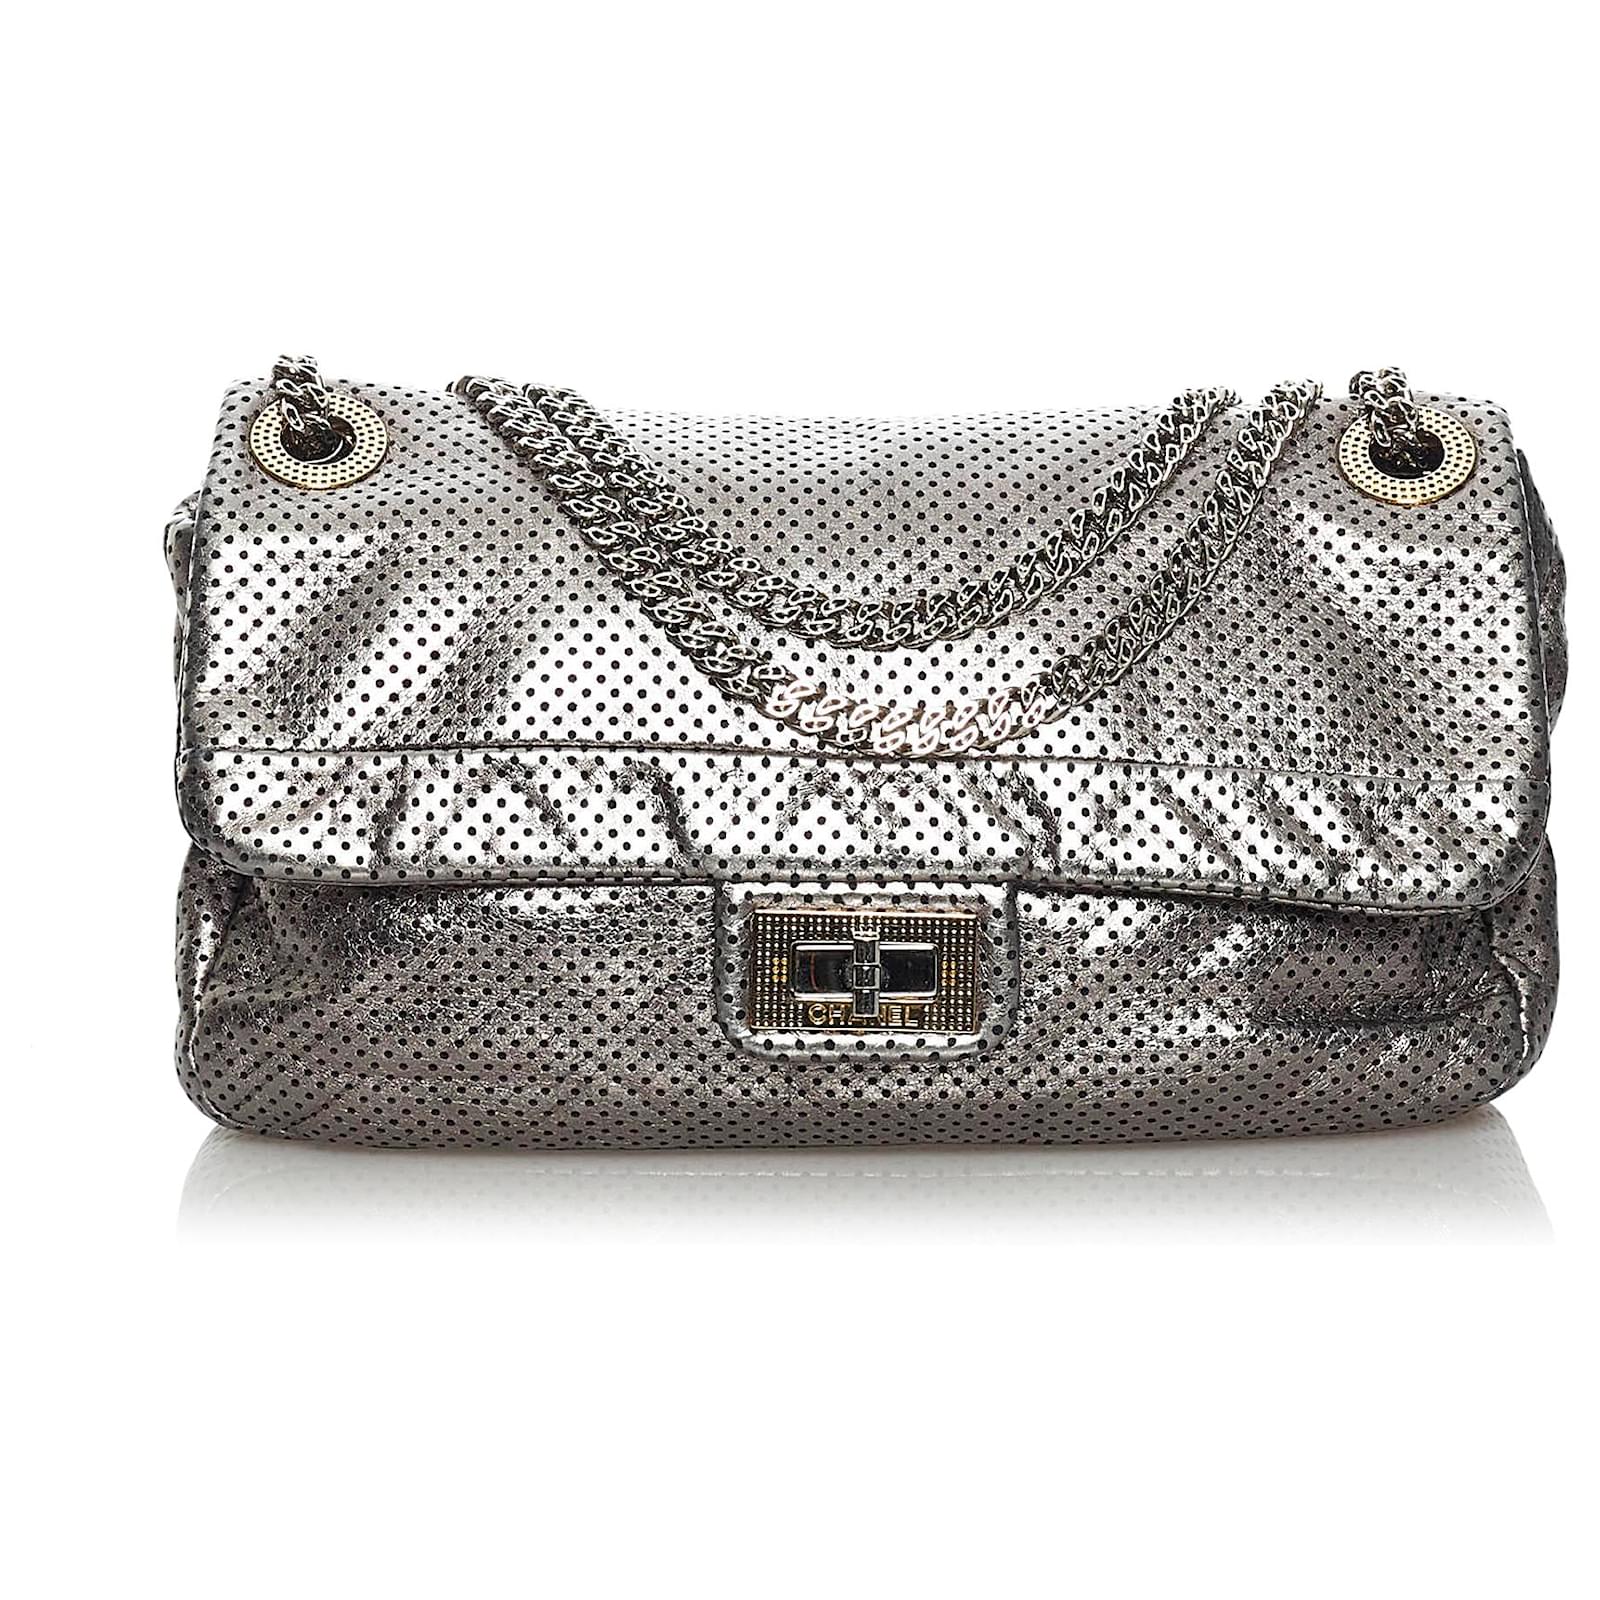 Chanel Silver Reissue Drill Perforated Leather Flap Bag Silvery